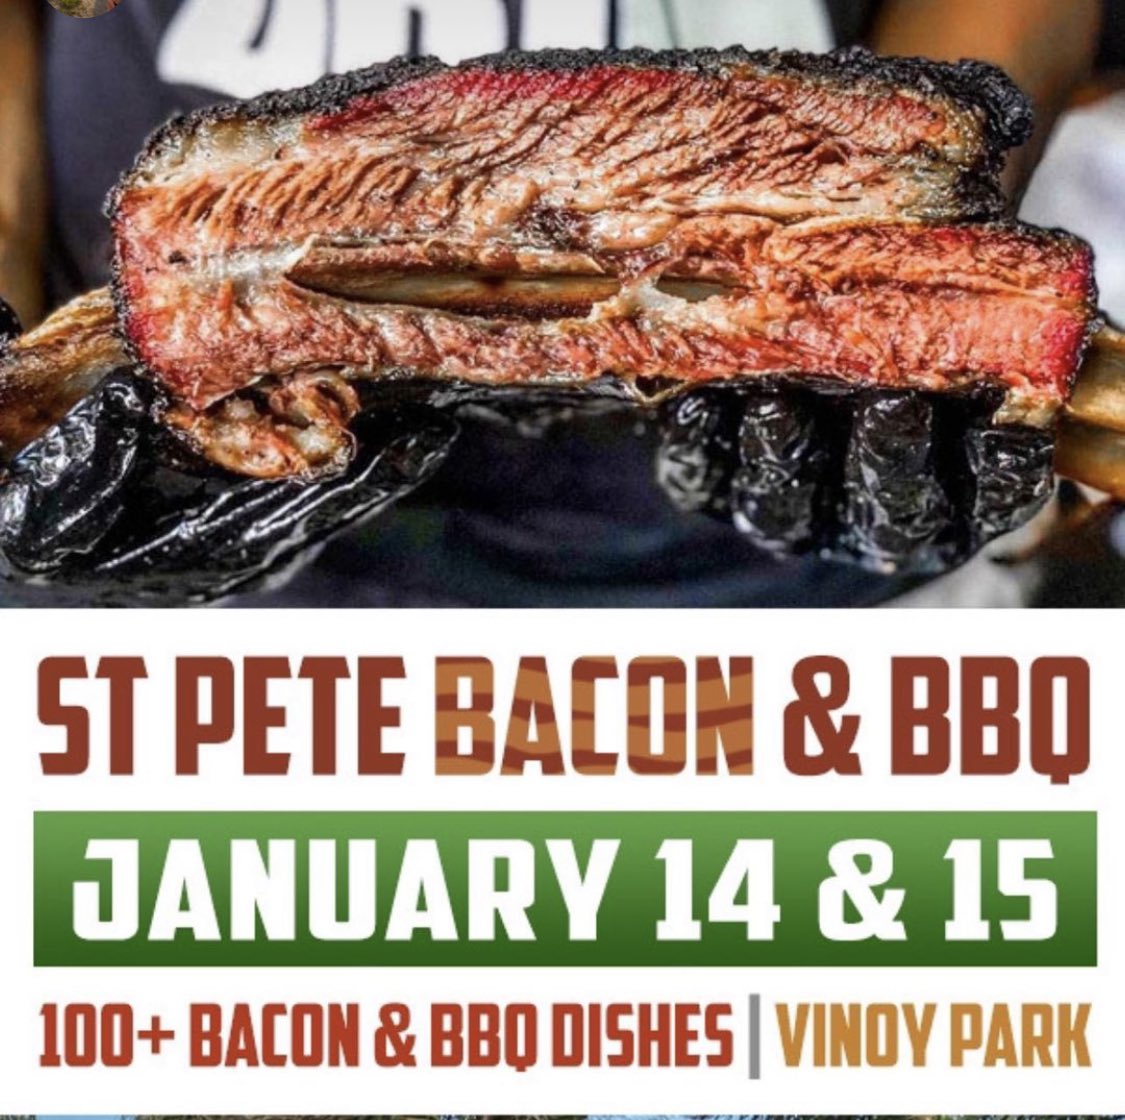 Another great event coming to #StPetersburg this month is #StPeteBaconandBBQFest! Get your tickets here: stpetebaconandbbq.com 

See you there! 👋🏻🍖

#thingstodostpete #thingstodotampa #tampabay #foodfestivals